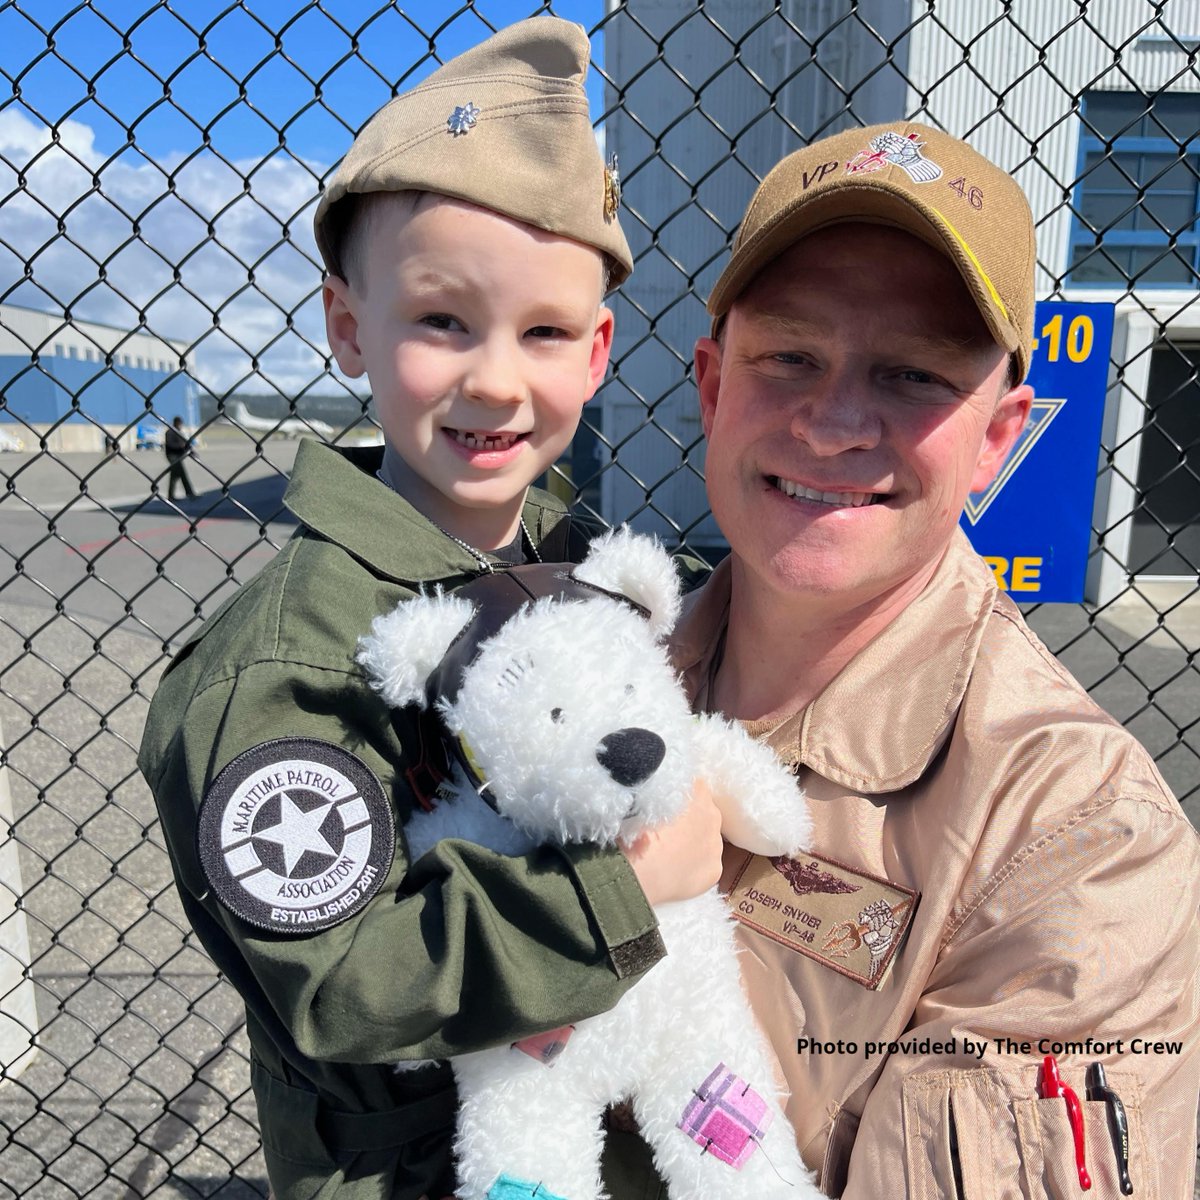 Preparing children for their parent's deployment can be difficult. Our community partner @TheComfortCrew provides #MilitaryKids with 'comfort kits' to help navigate deployment. Learn more about preparing kids for deployment: wwp.news/3Vym605 #MonthOfTheMilitaryChild